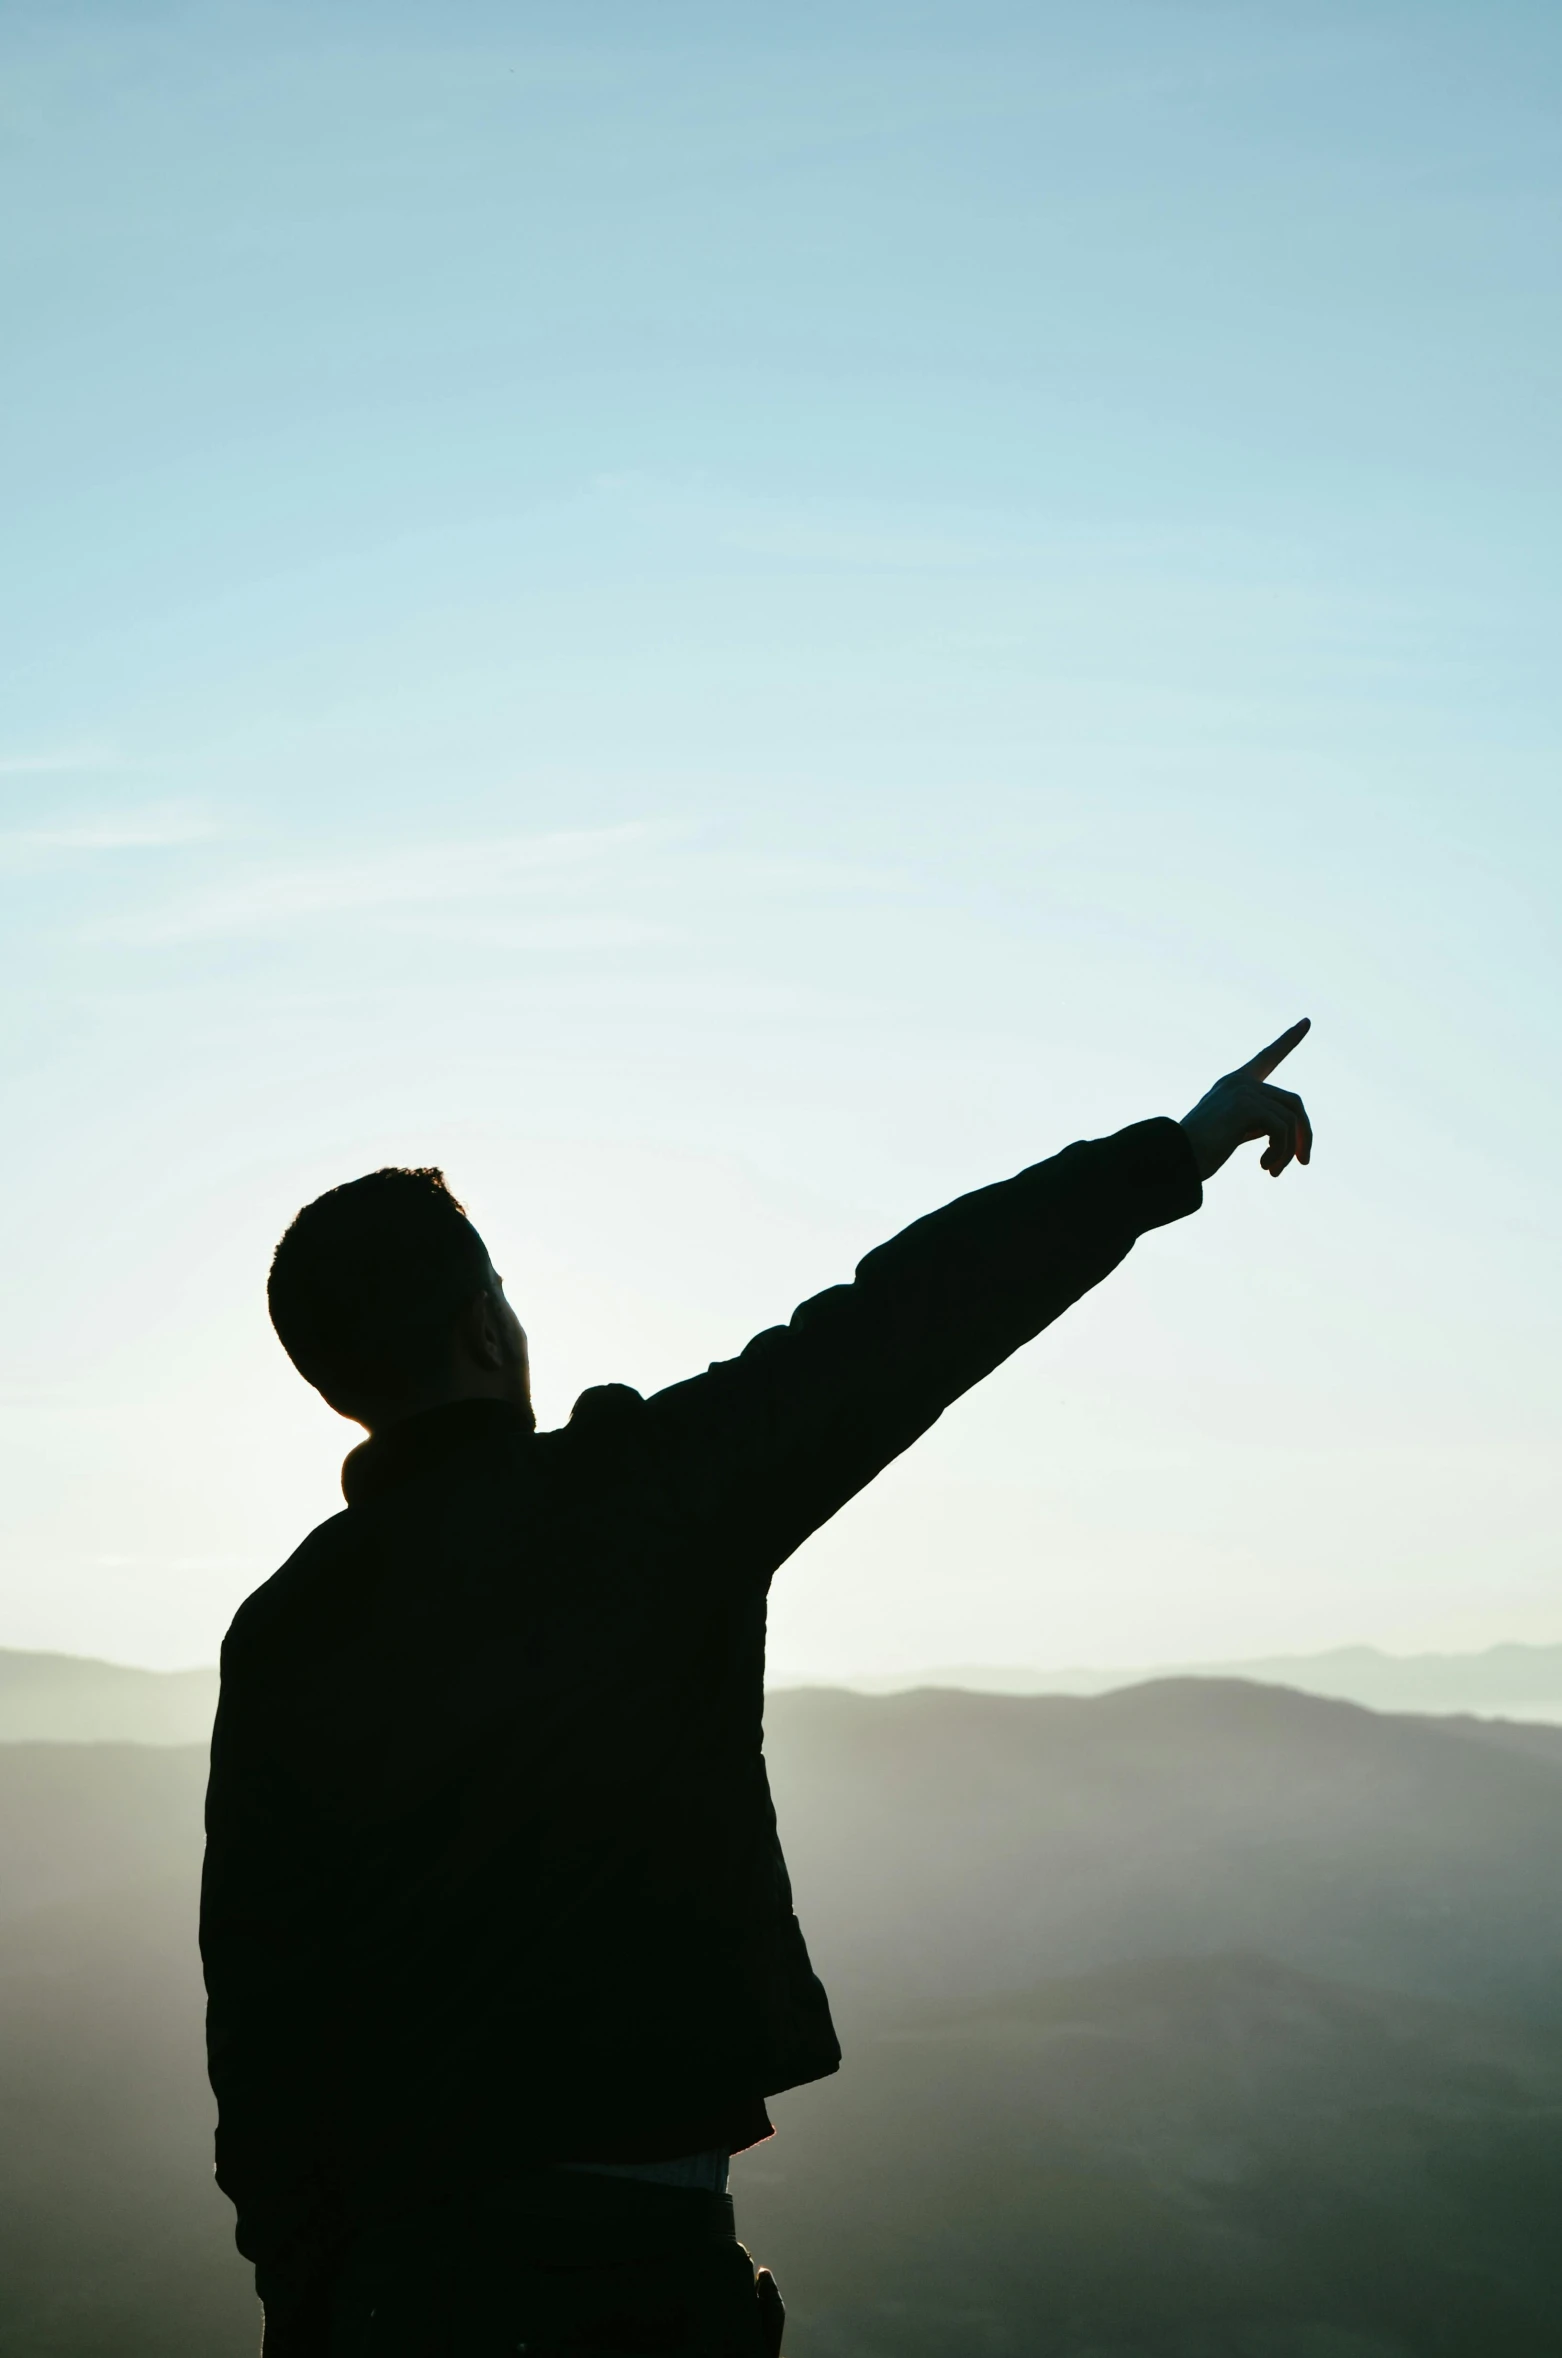 the man is pointing to the sky near mountains